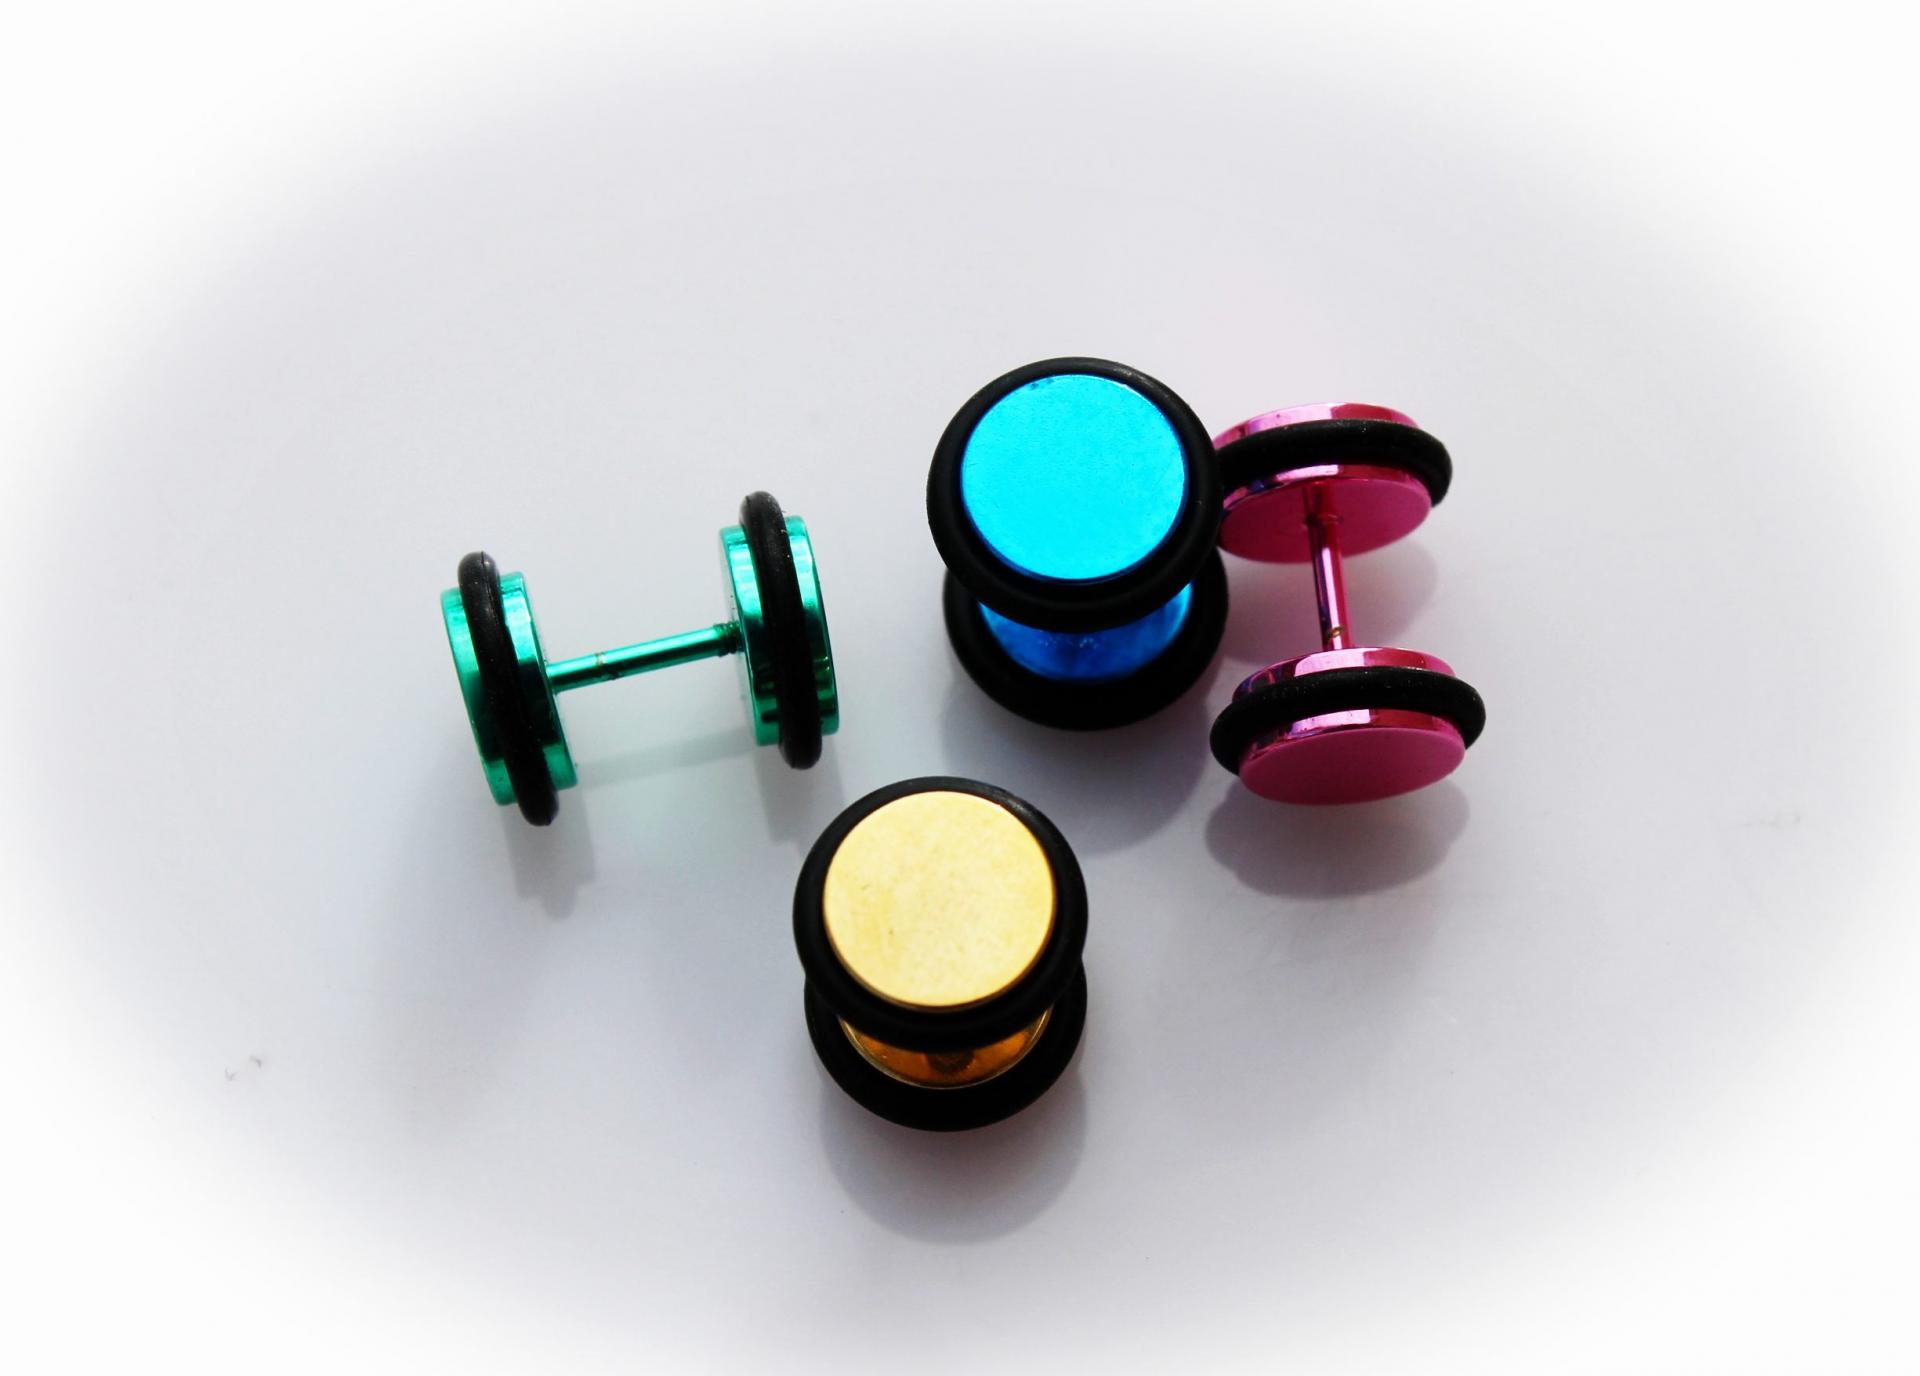 Fake ear plug designs from Chrissie C in the WOW Jewellery collection